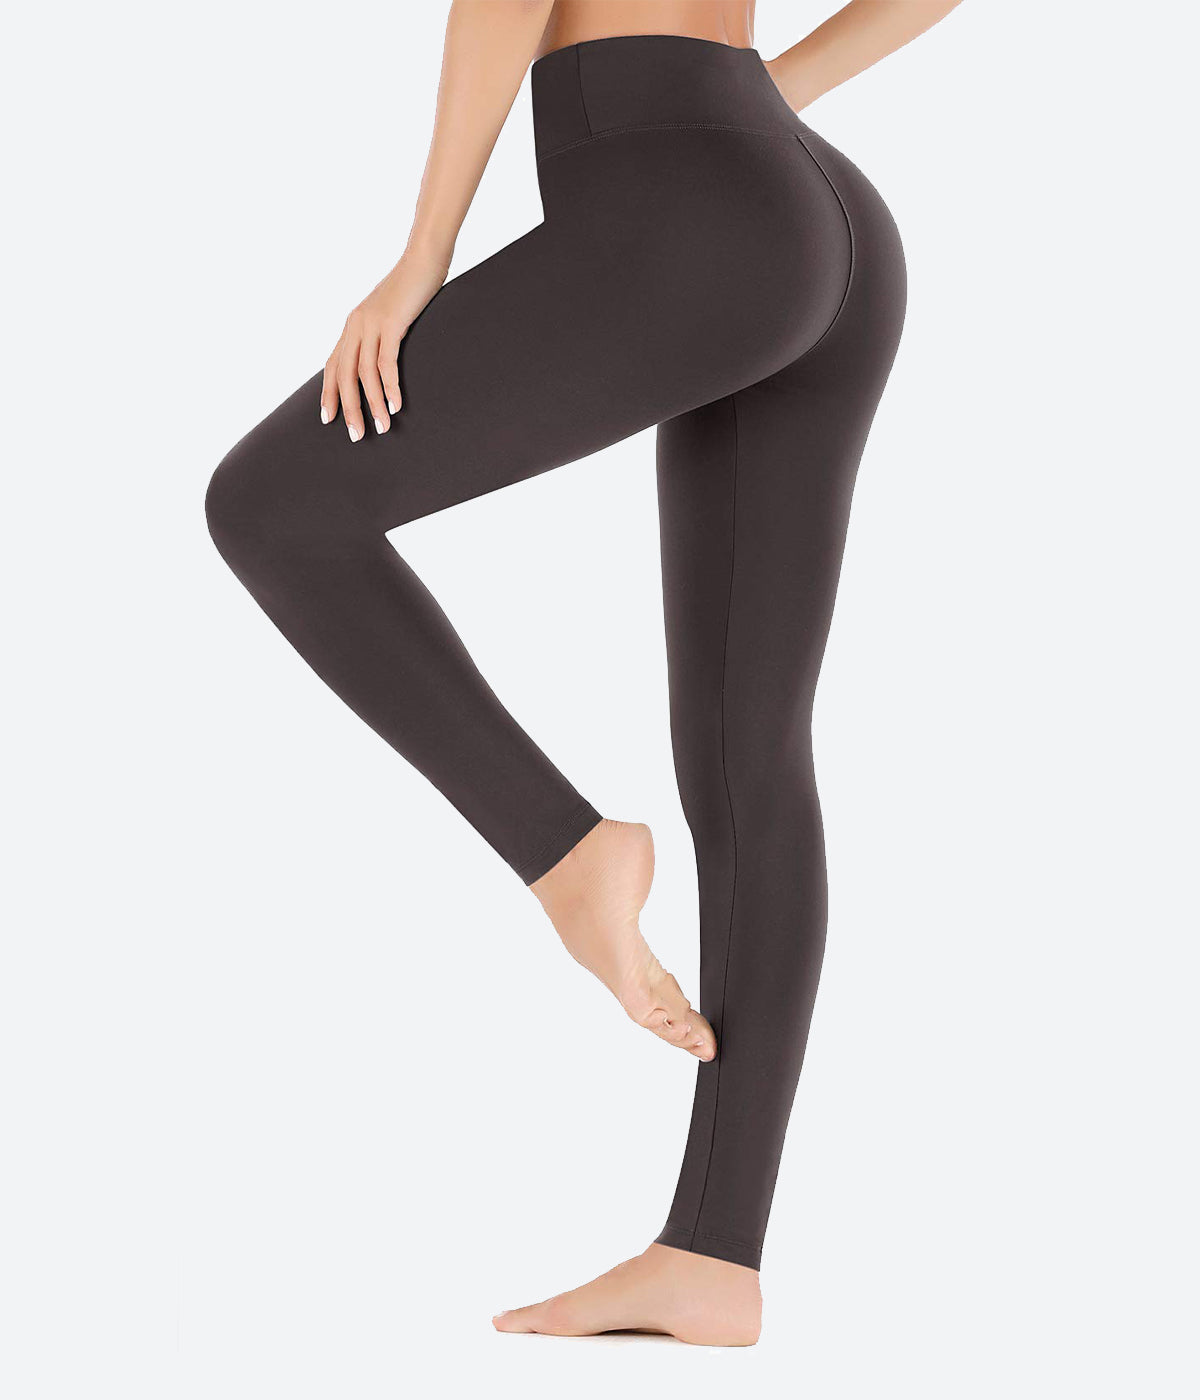 Shop the Popular Heathyoga Yoga Pants with Pockets on Sale at